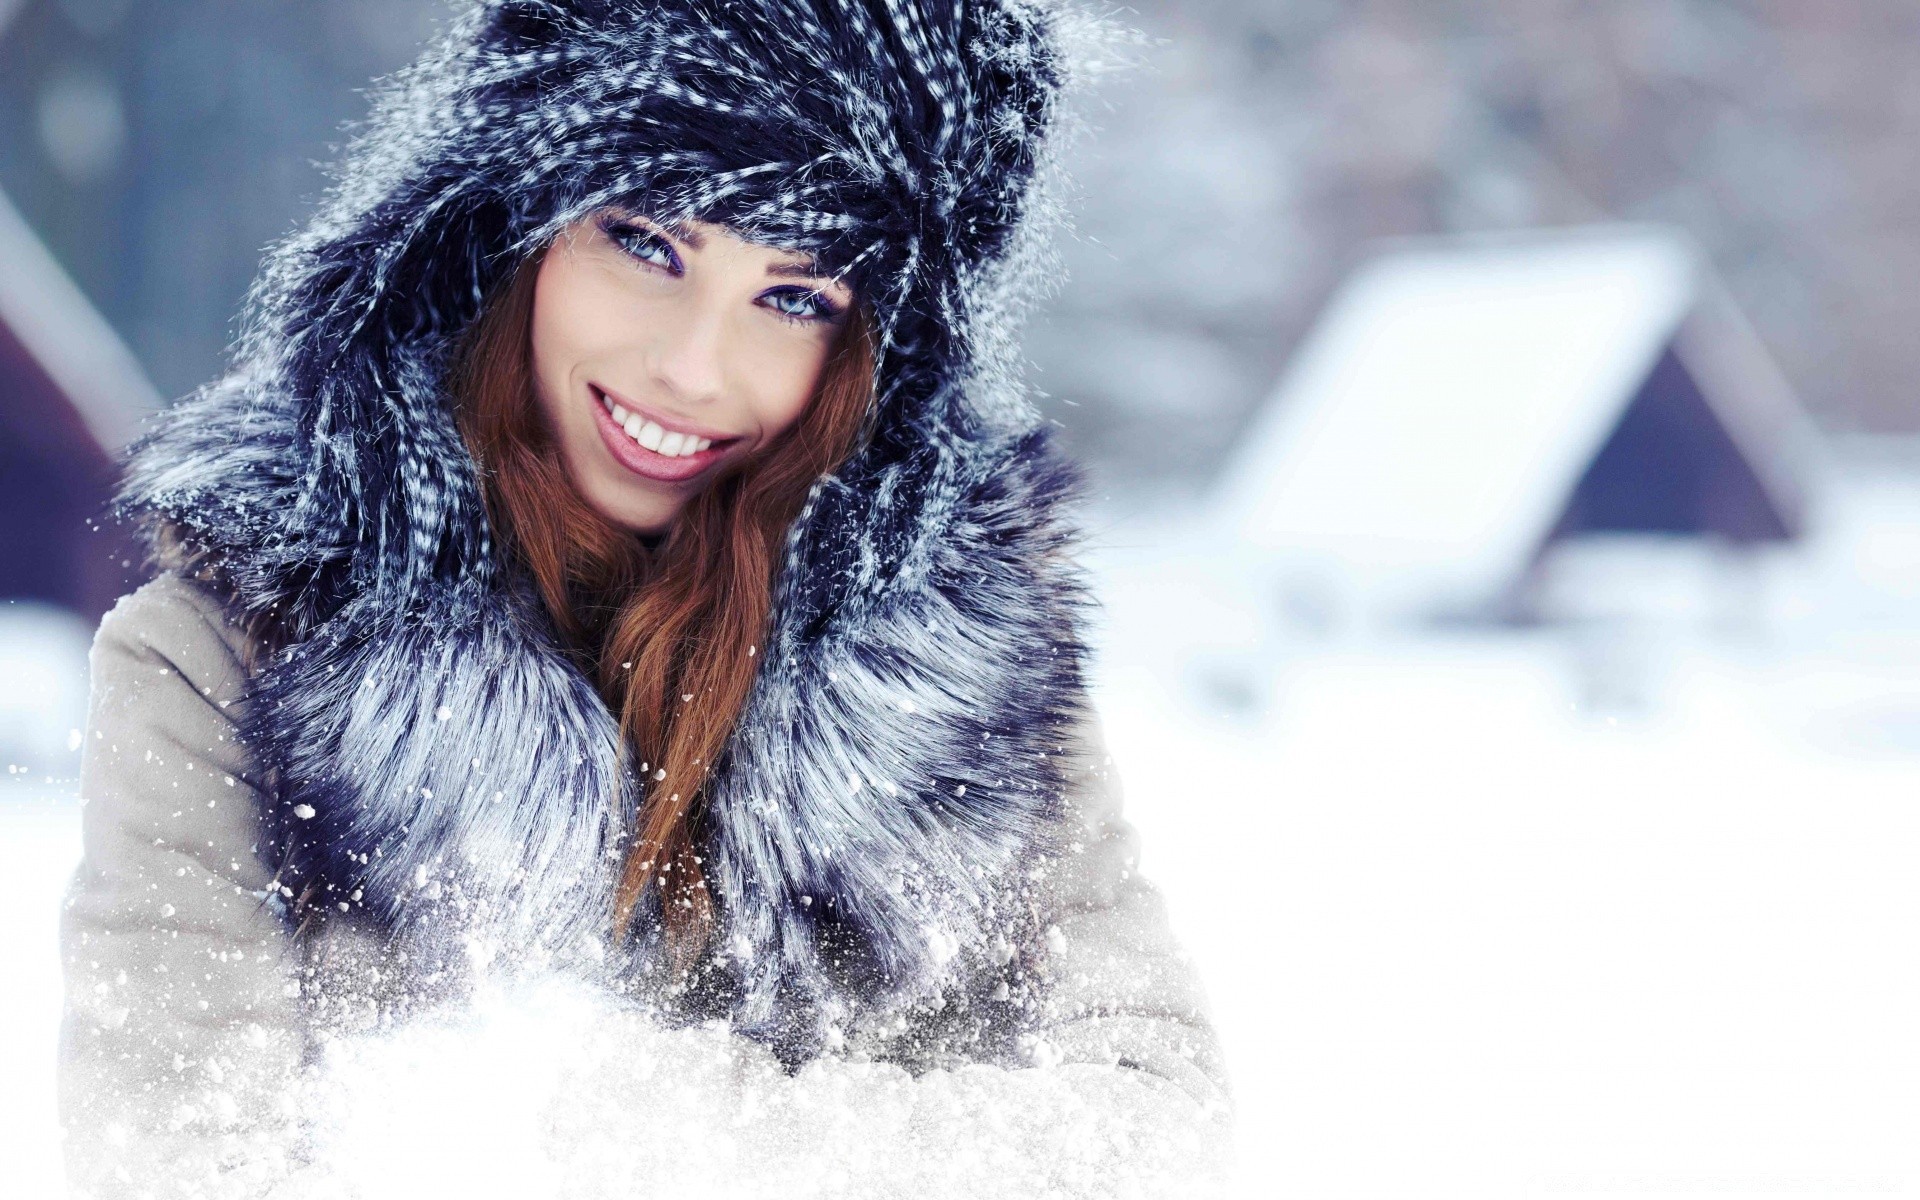 the other girls winter snow cold frost christmas snowflake woman season portrait lid frozen fashion fur outdoors girl ice